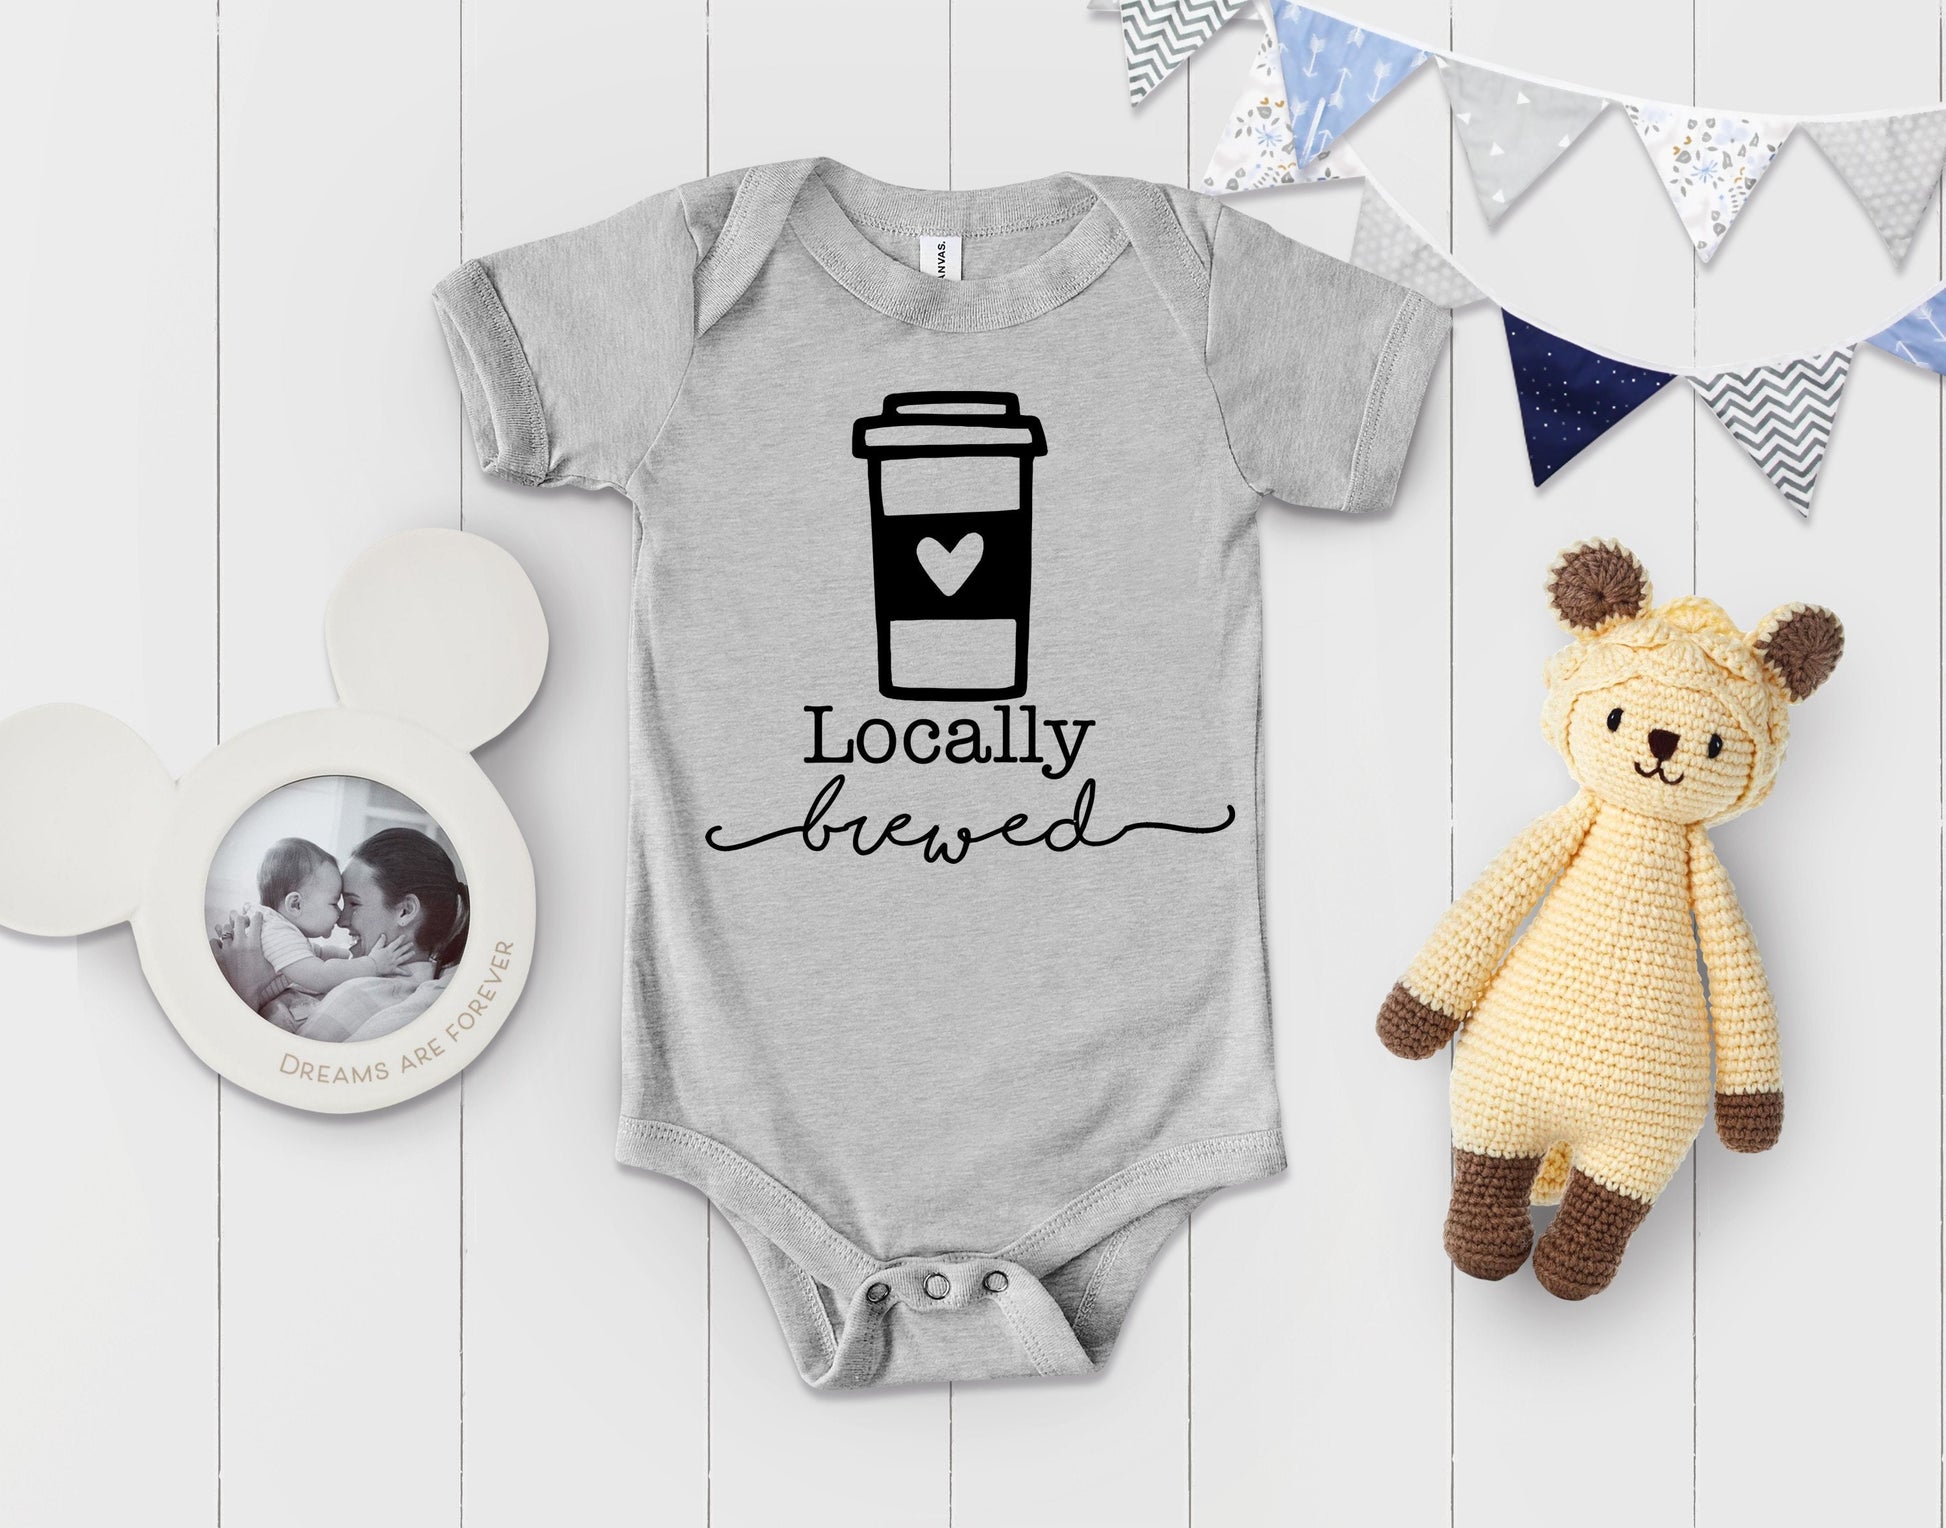 Locally Brewed Baby Shirt or Bodysuit - Cute Baby Gift - baby shower gift - mommy needs coffee - coffee lover mom -